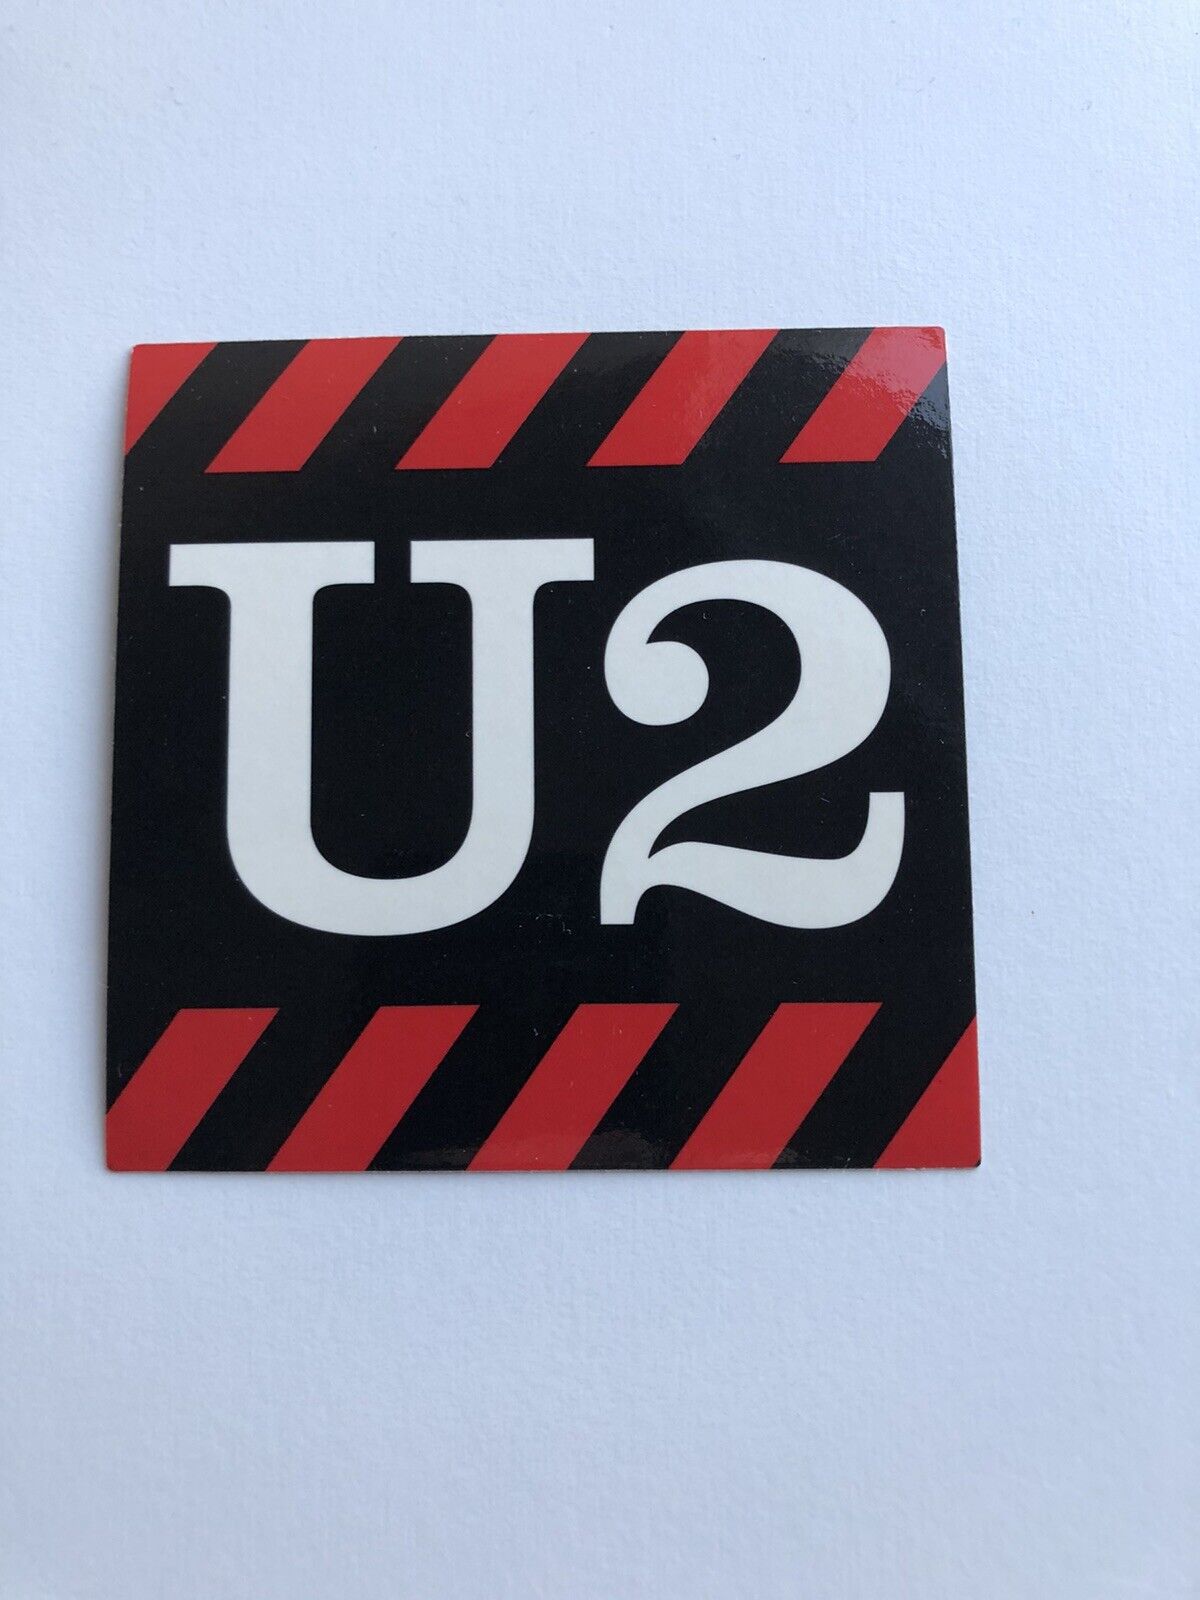 U2 “how To Dismantle An Atomic Bomb” Promotional Sticker